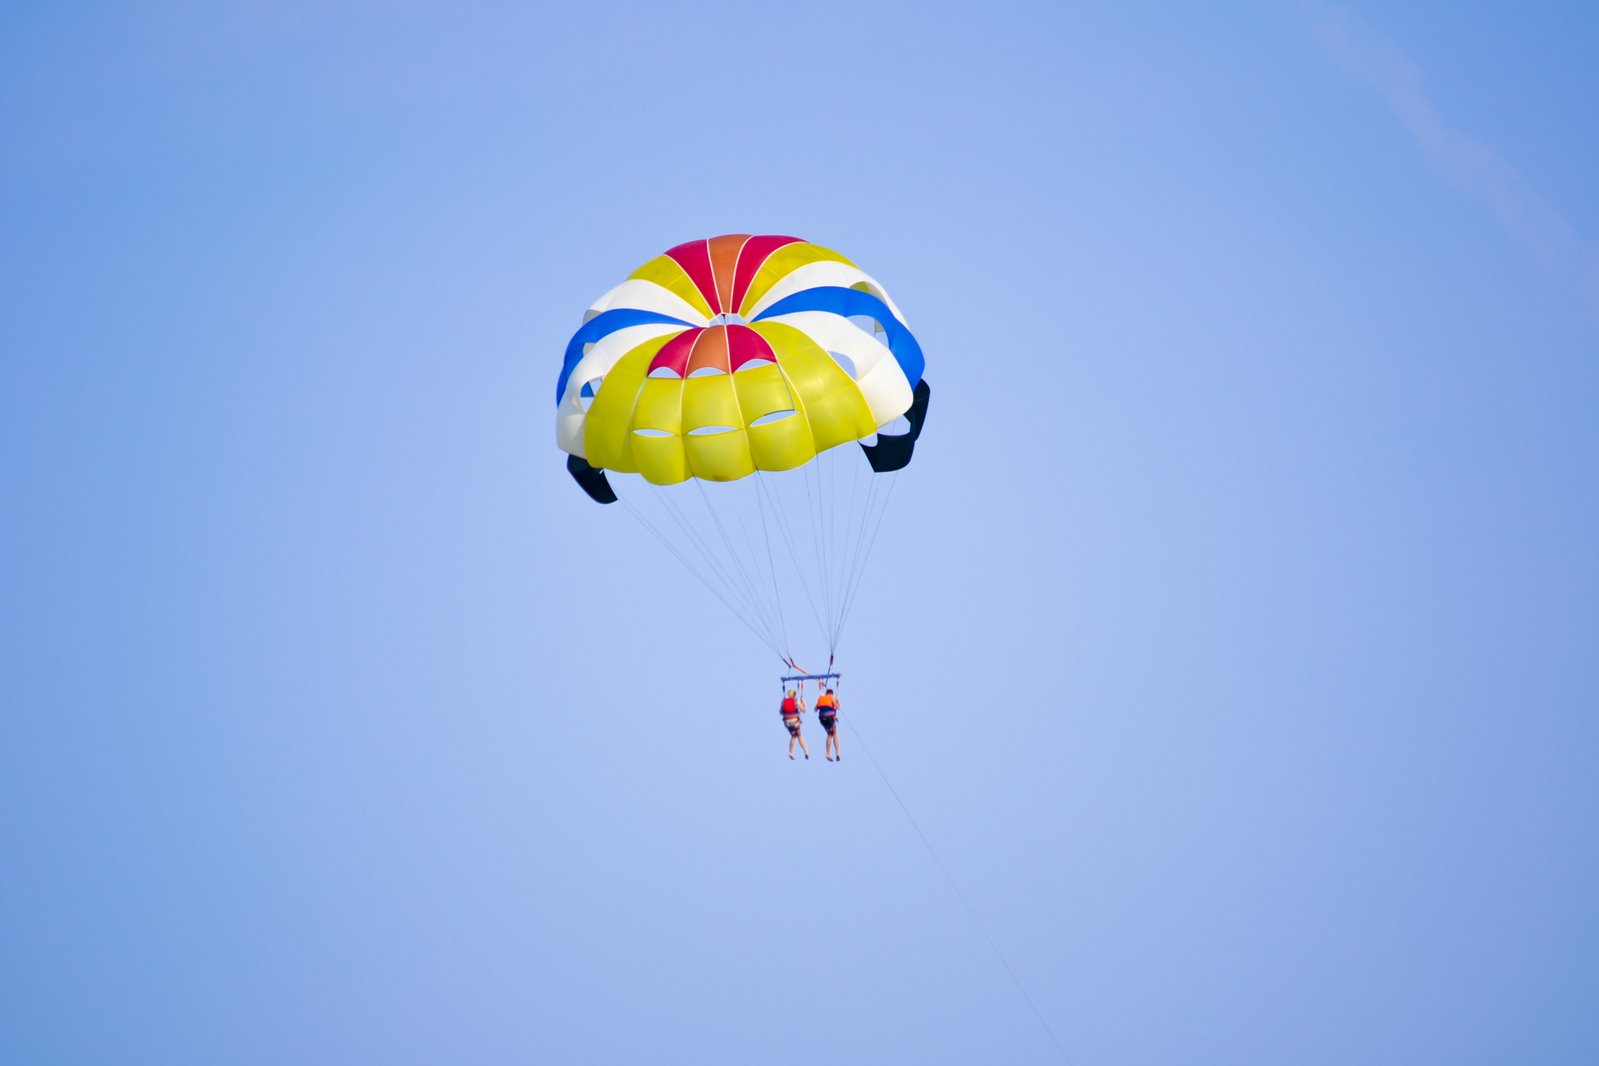 the person in red, white and blue is parasailing through the clear sky